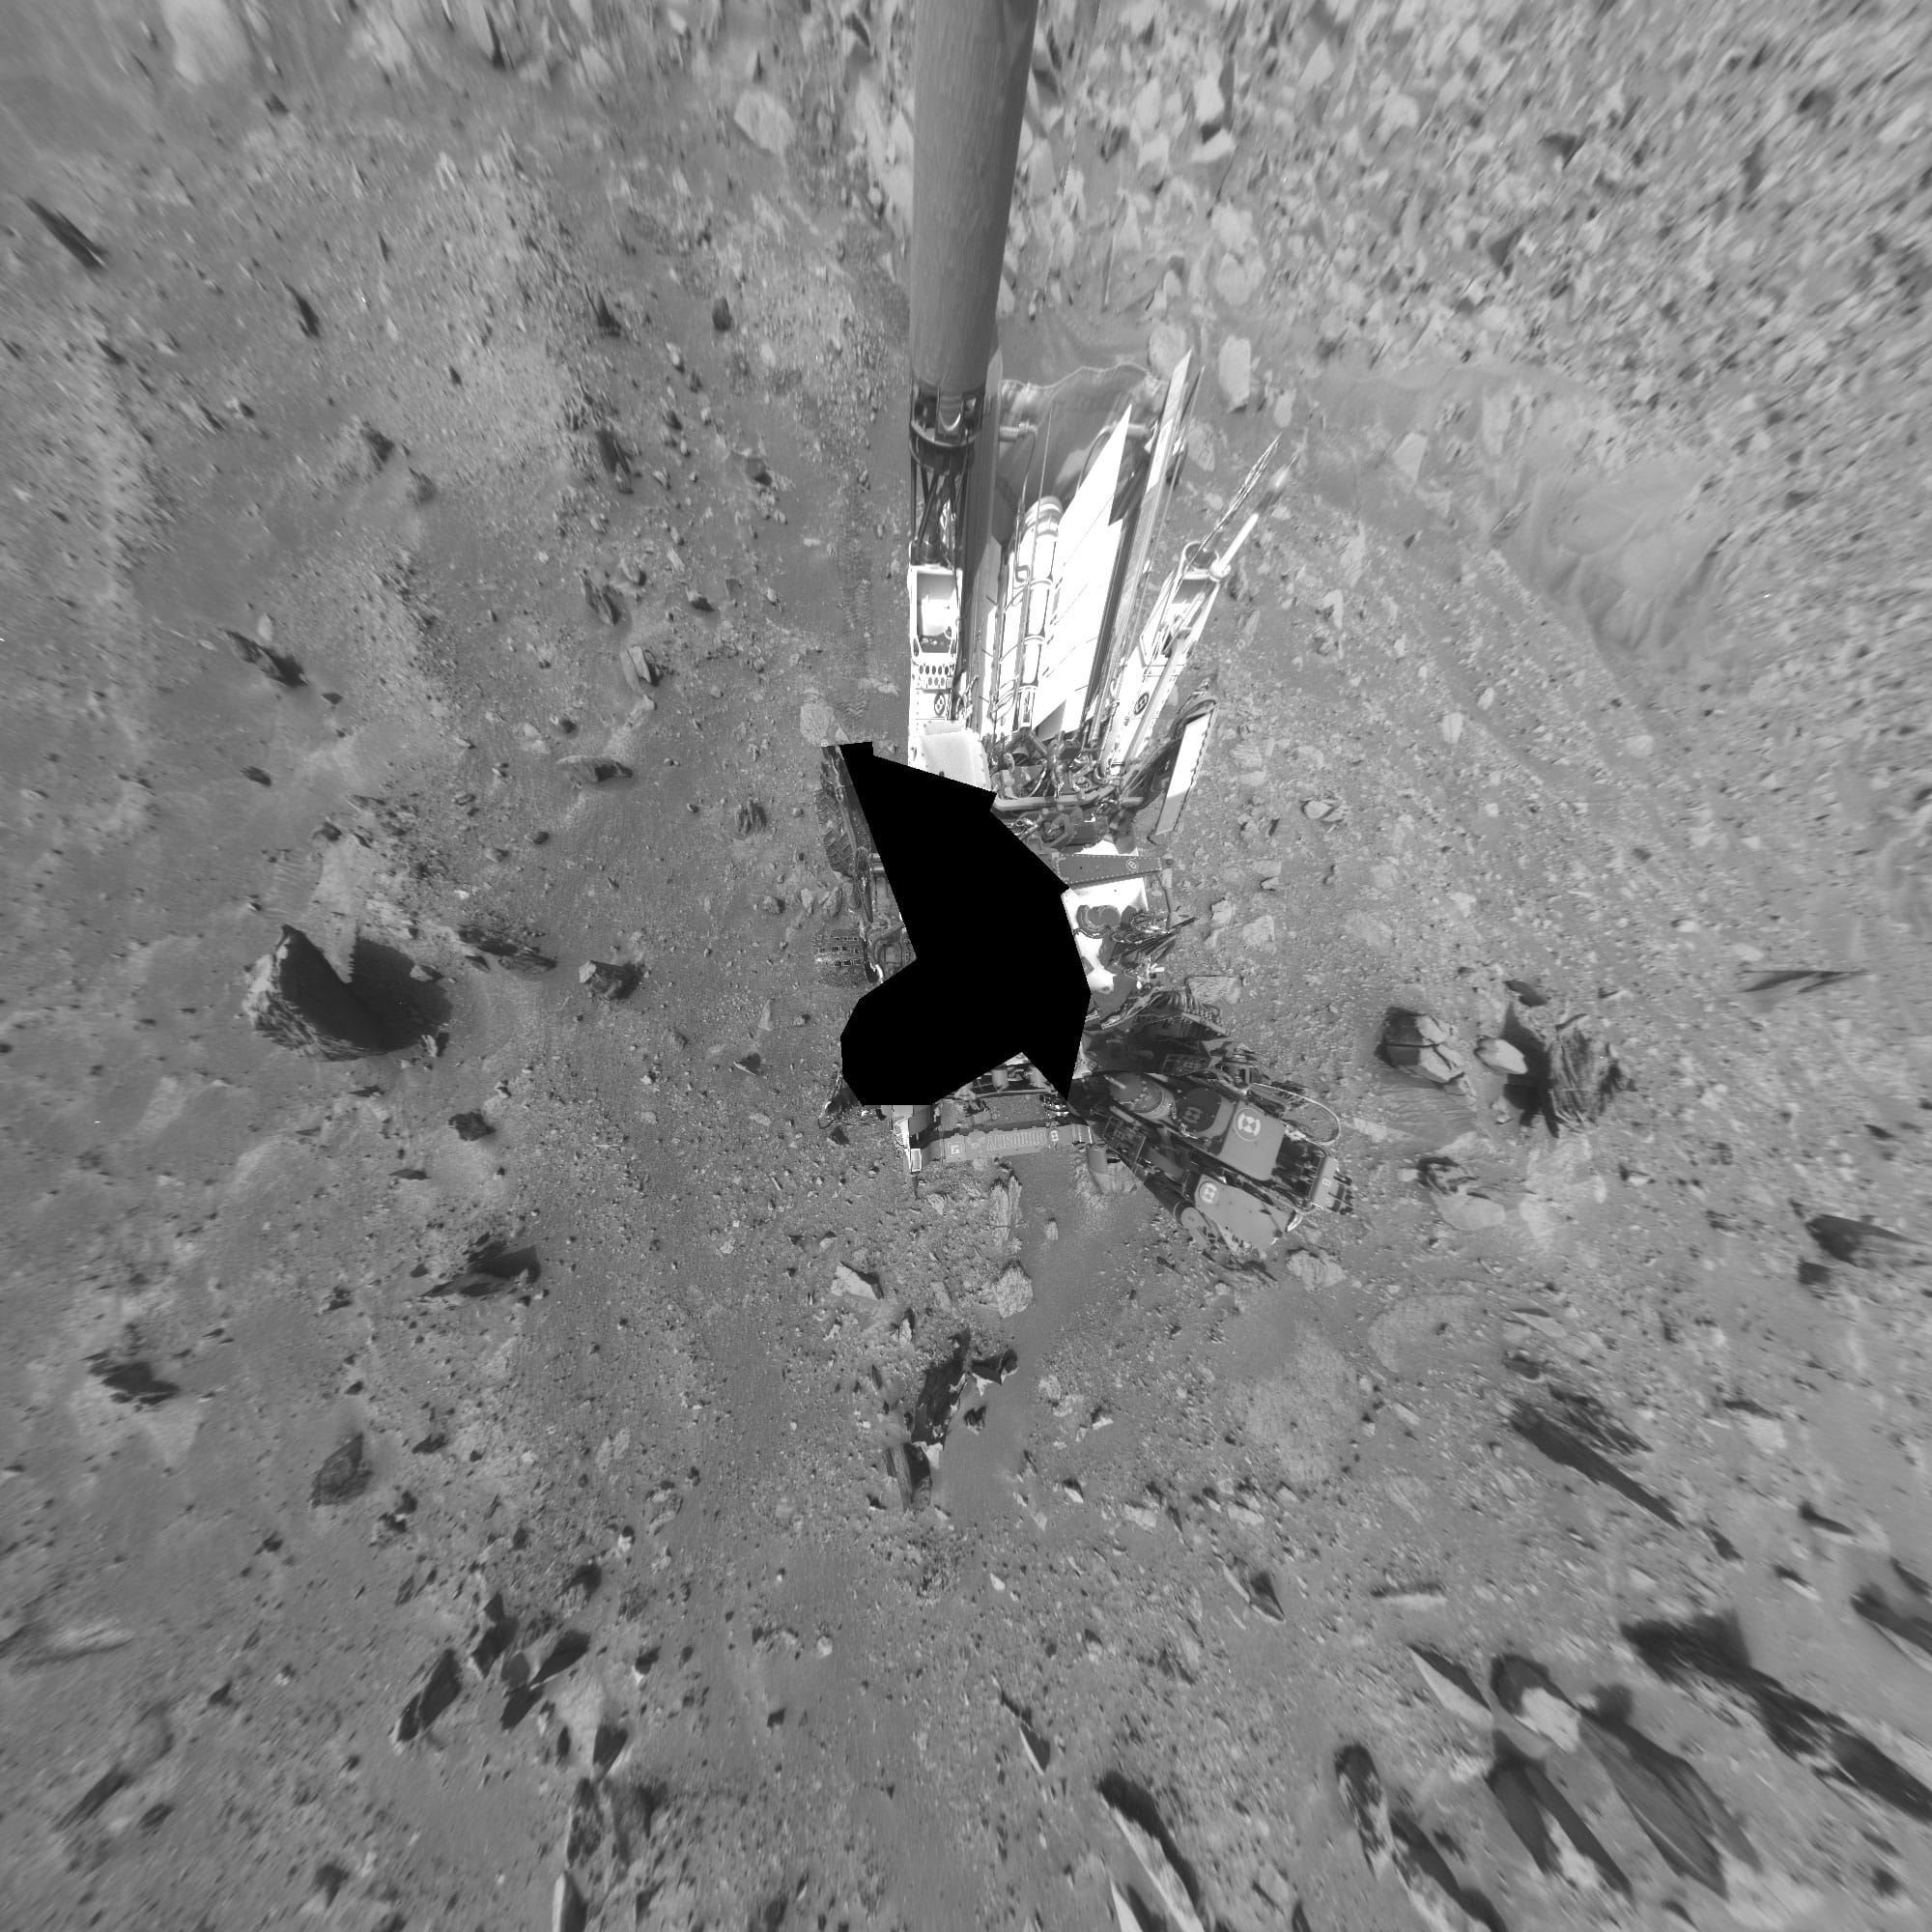 This projection provides an overhead view, but introduces distortion for items not on the surface, such as large rocks and the rover itself. Curiosity took the images on May 23, 2024, Sol 4193 of the Mars Science Laboratory mission at drive 2054, site number 107. The local mean solar time for the image exposures was 2 PM.